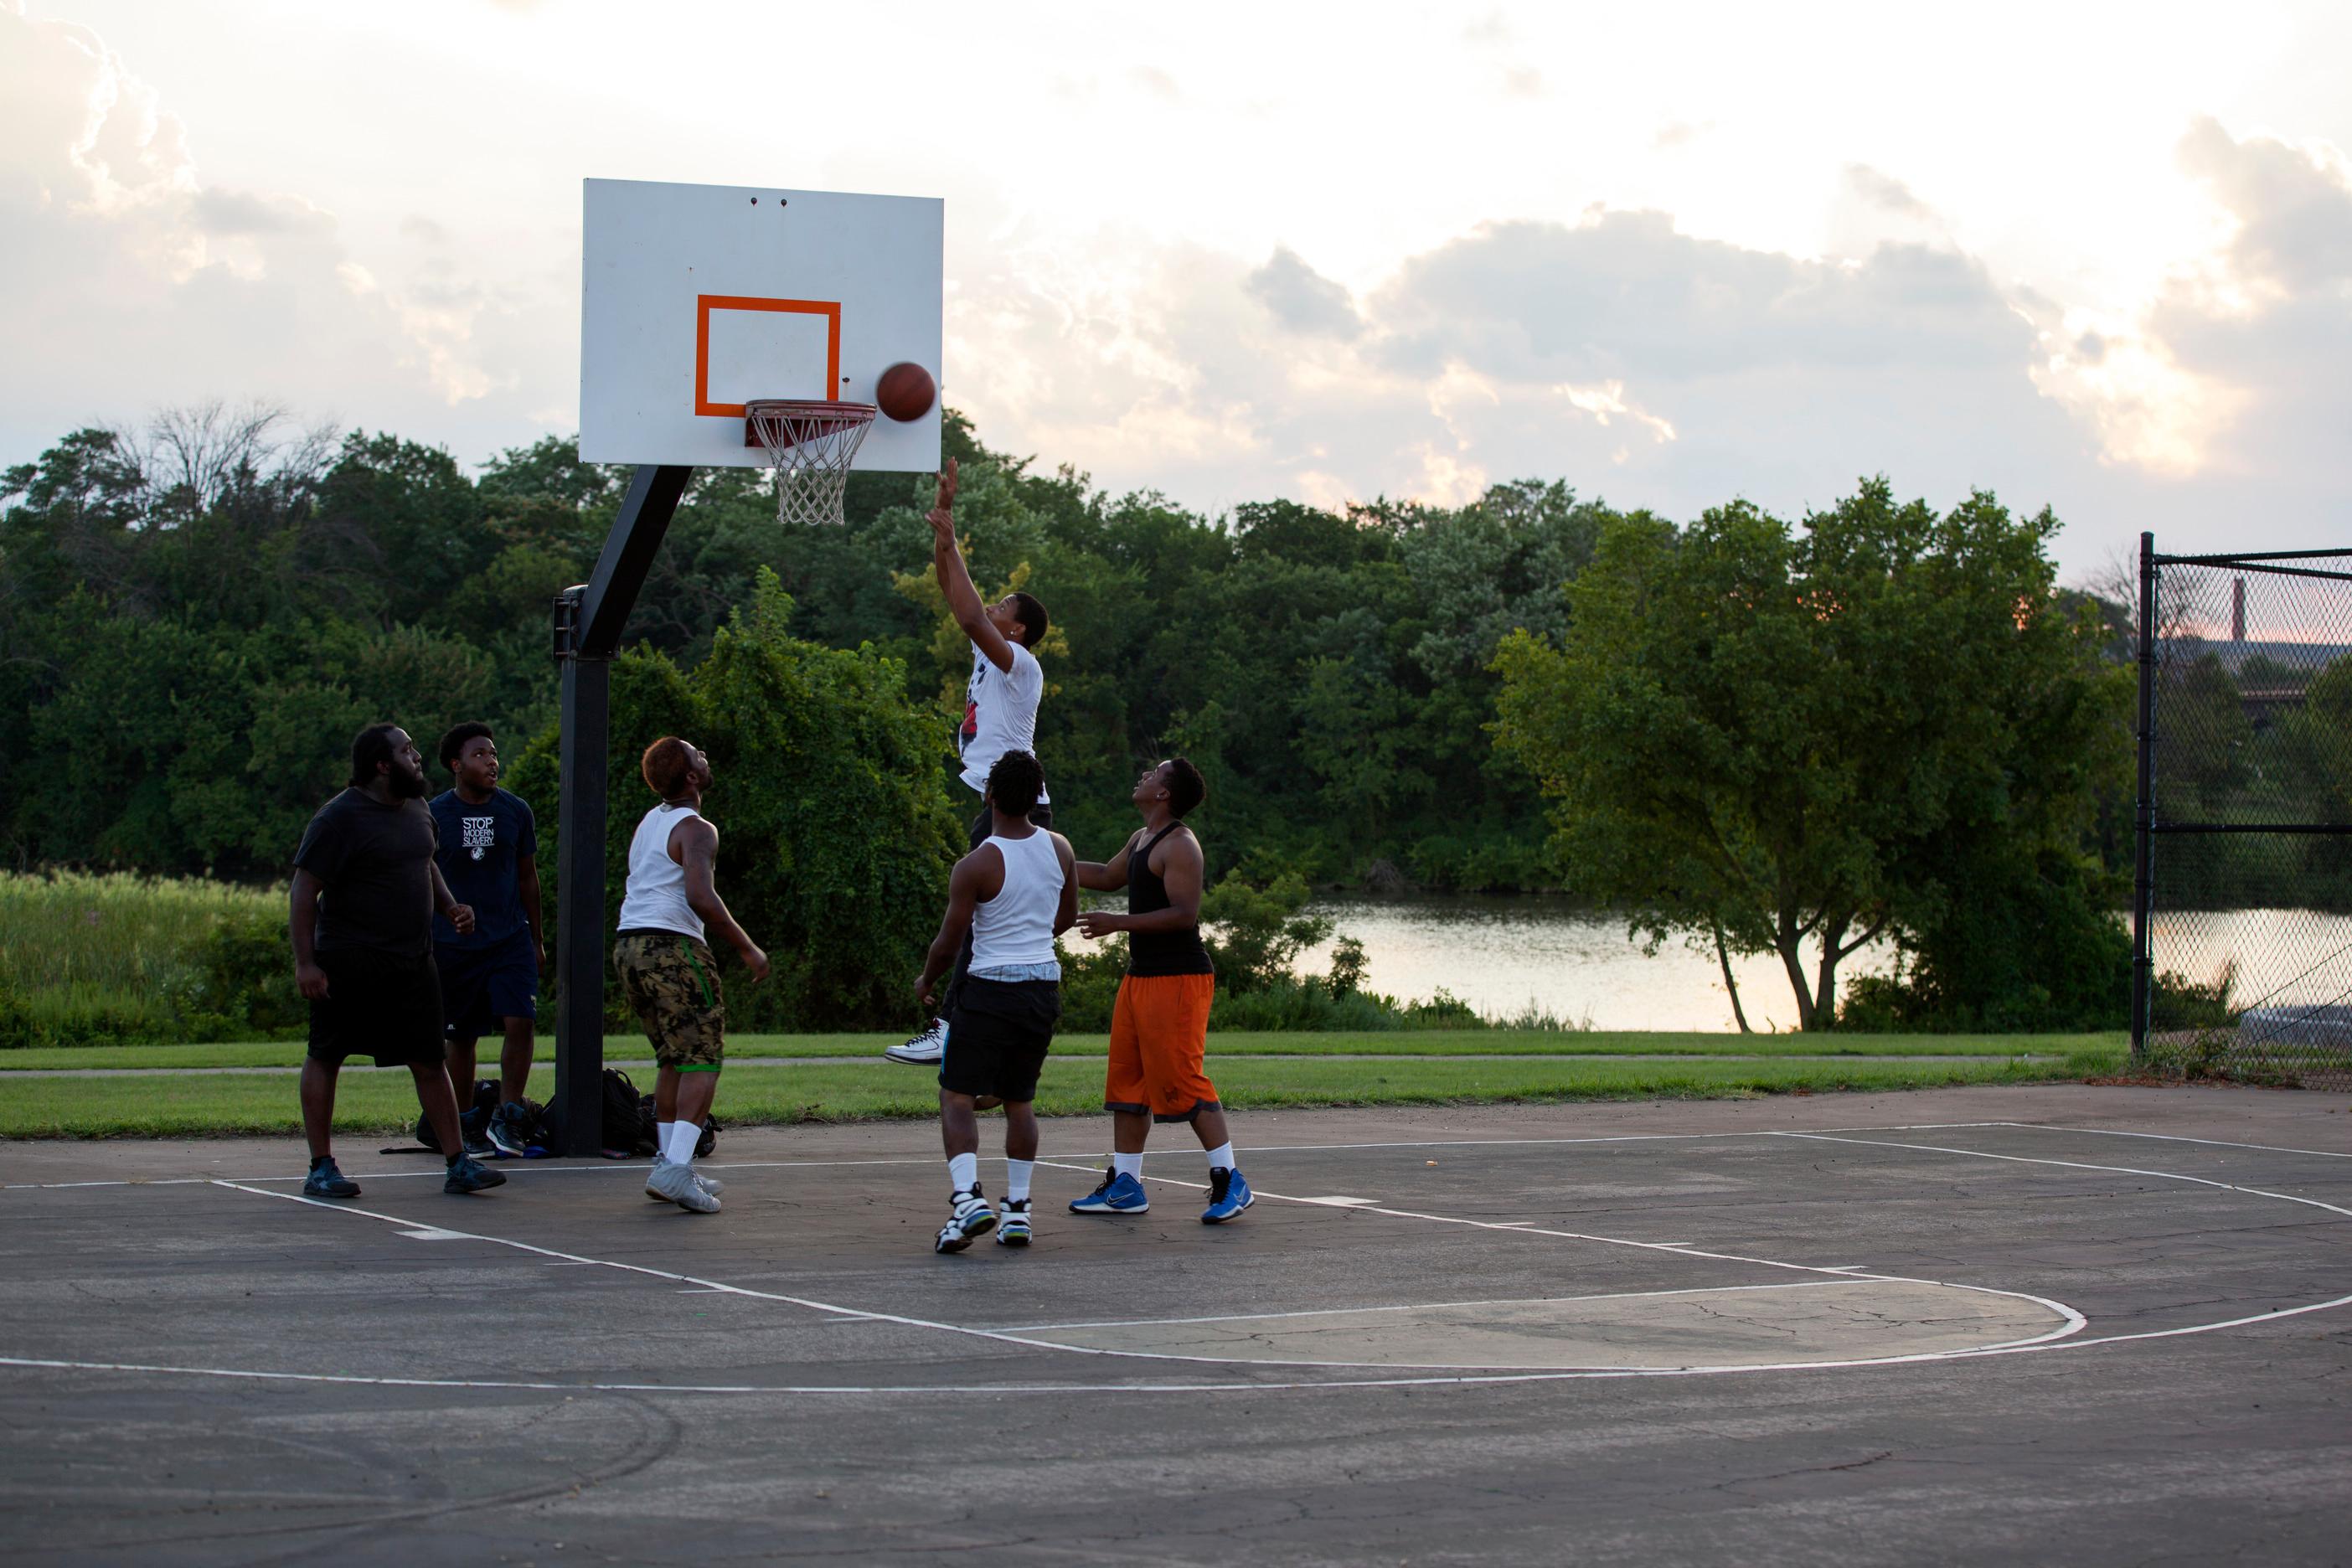 A few men are playing basketball at Anacostia with the Anacostia River in the background.